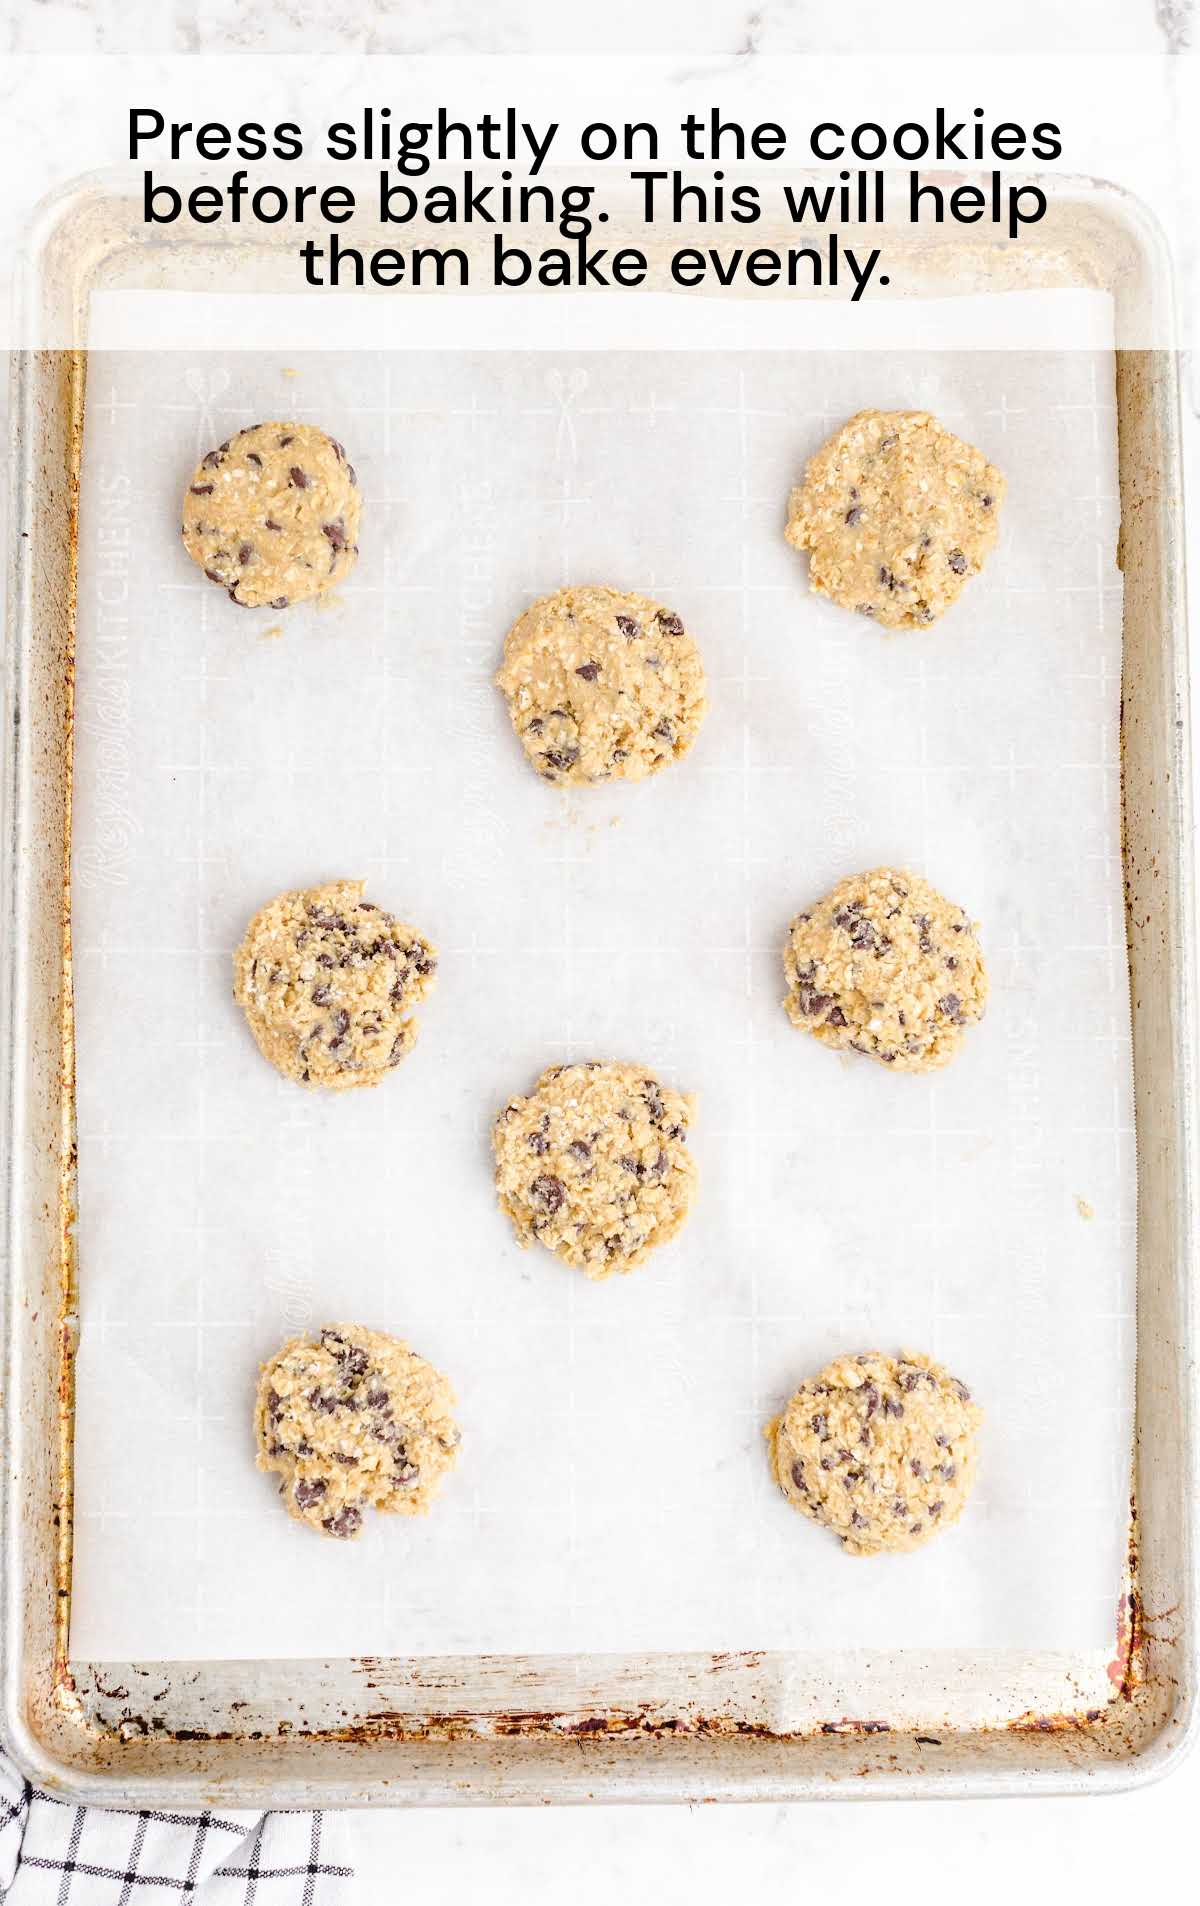 Oatmeal Chocolate Chip Cookies on a baking pan